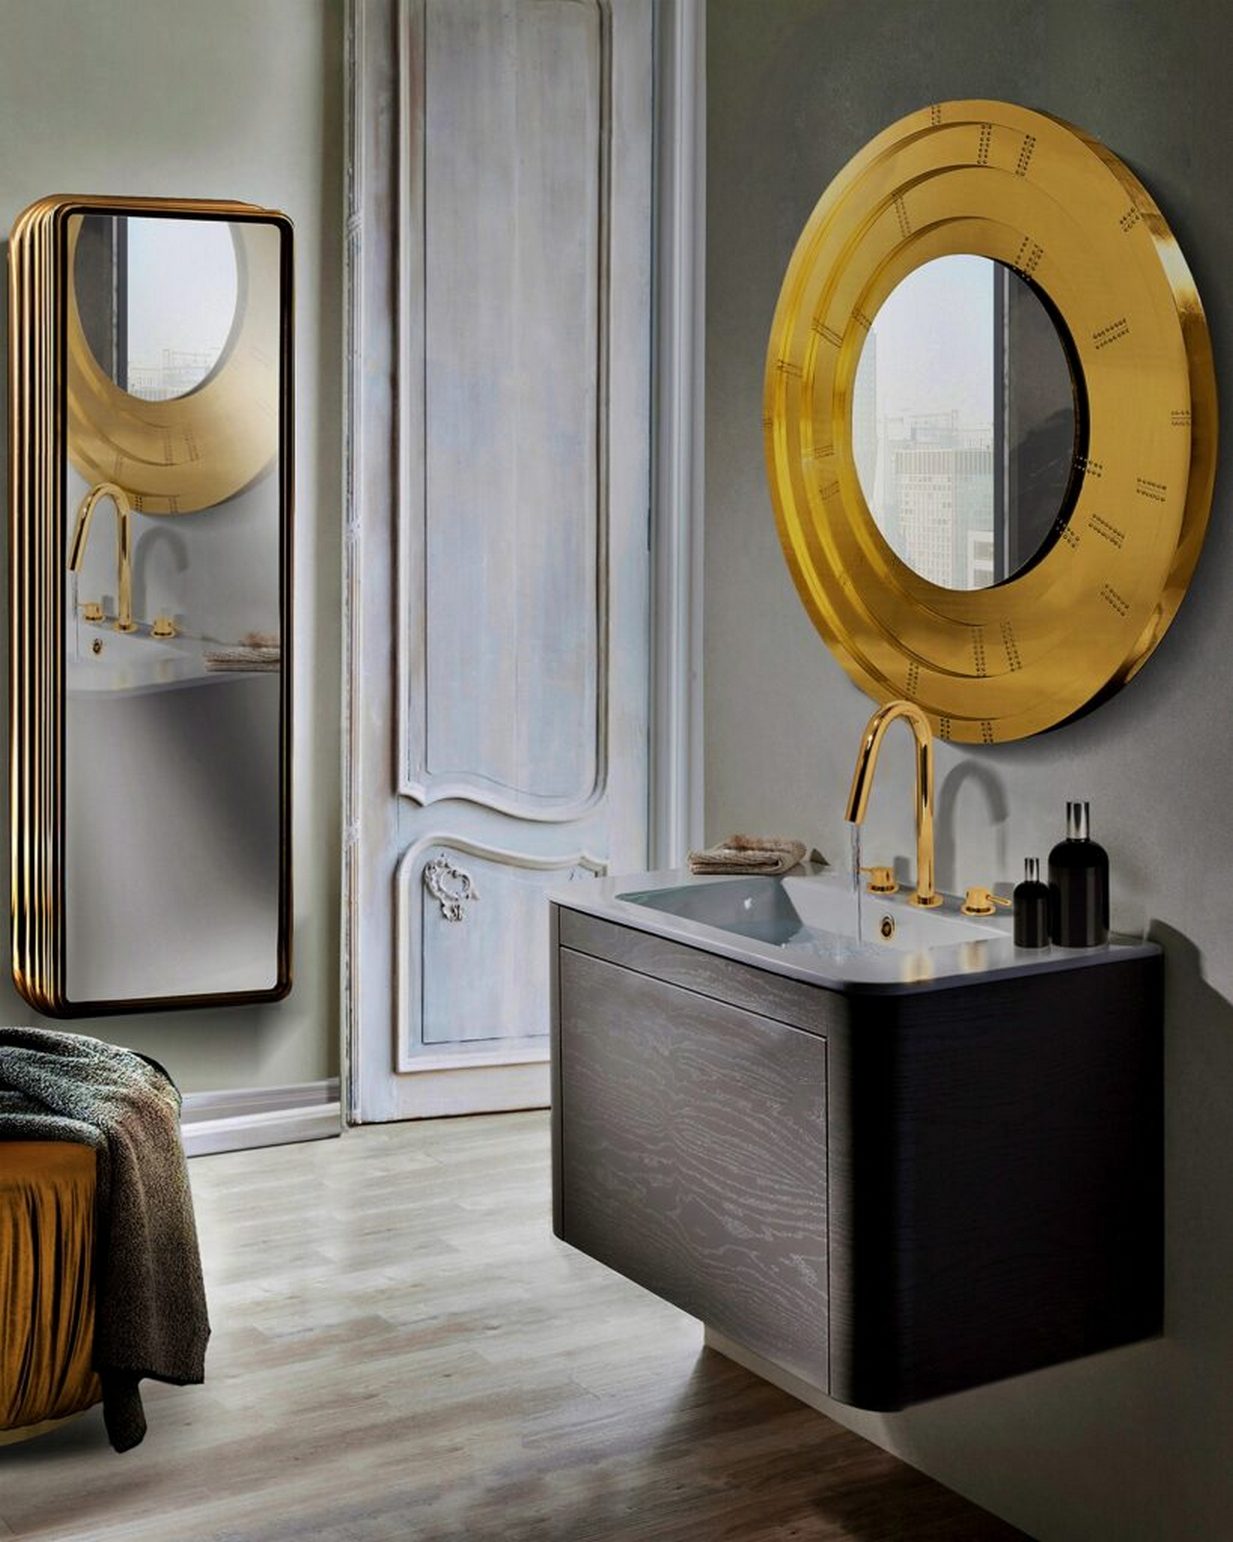 Facts about Gold in Your Bathroom Design